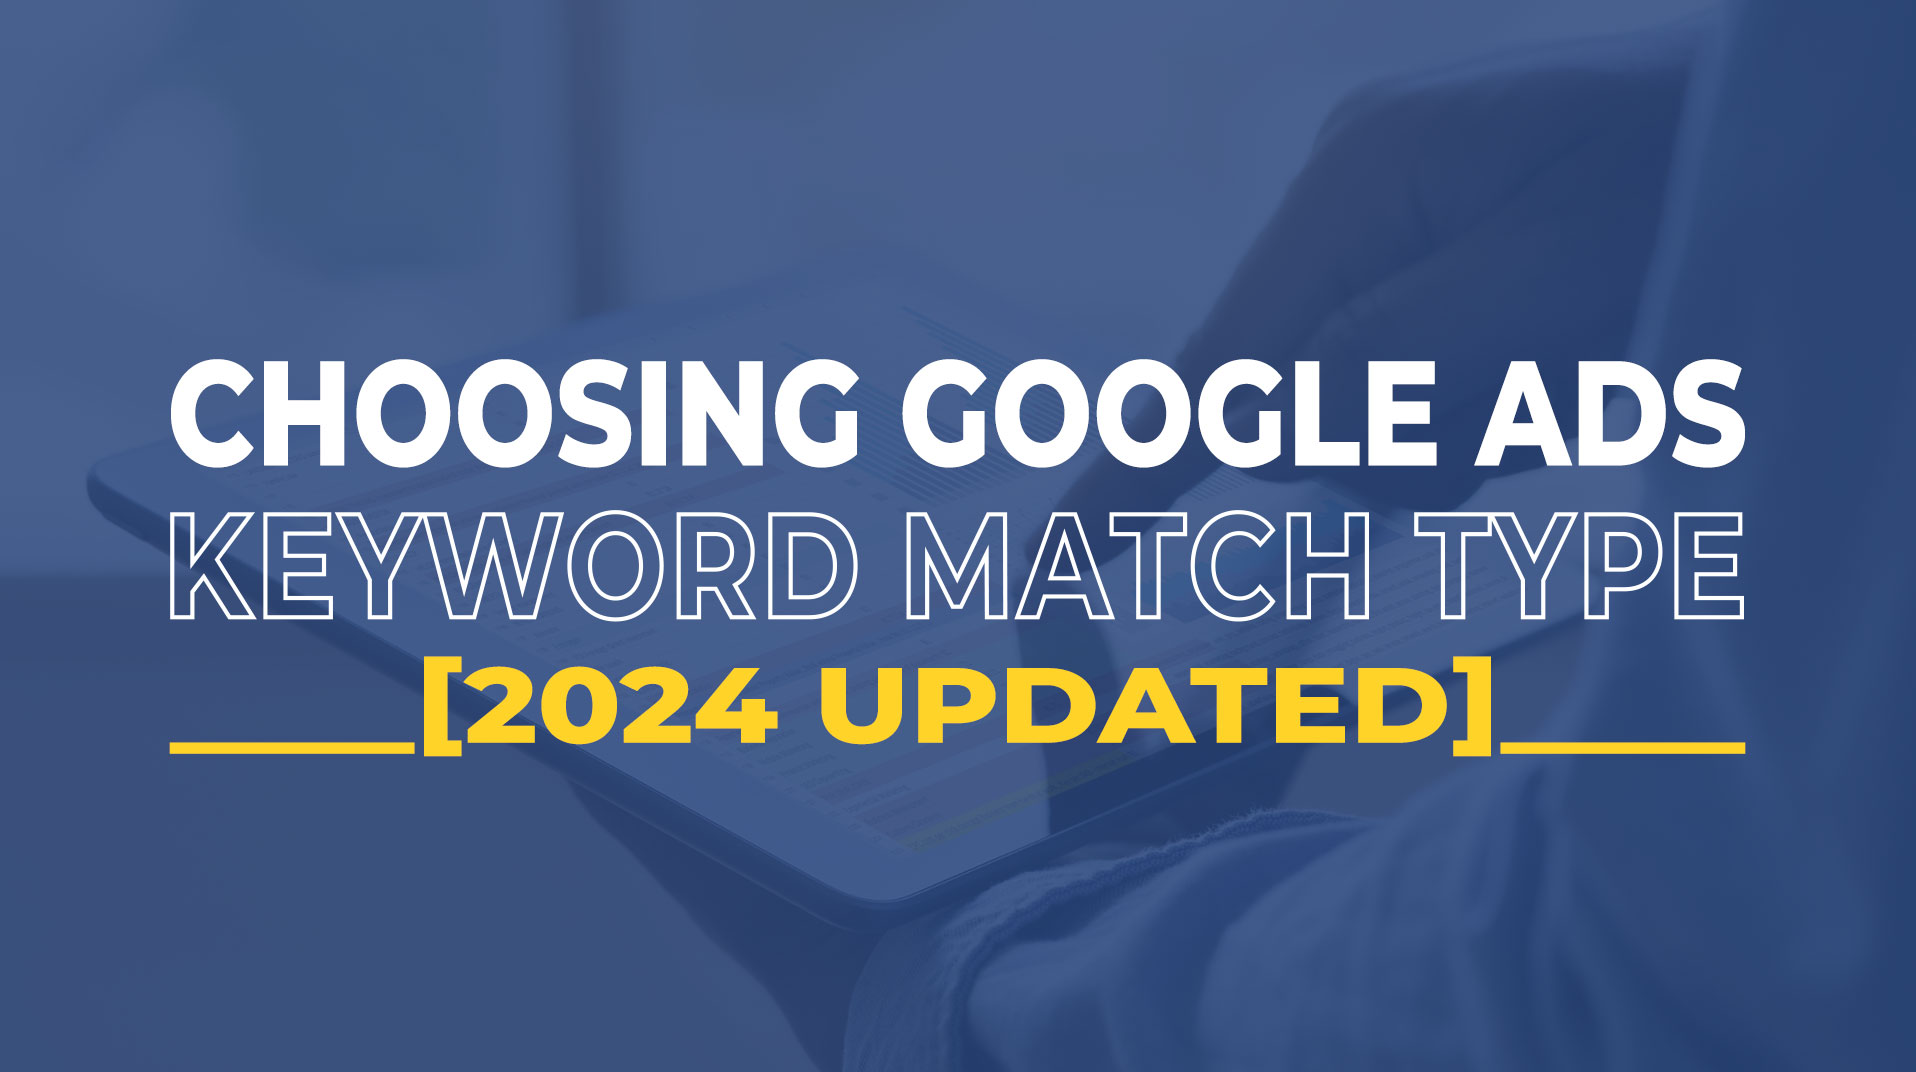 How to Choose the Right Keyword Match Type for Google Ads Success